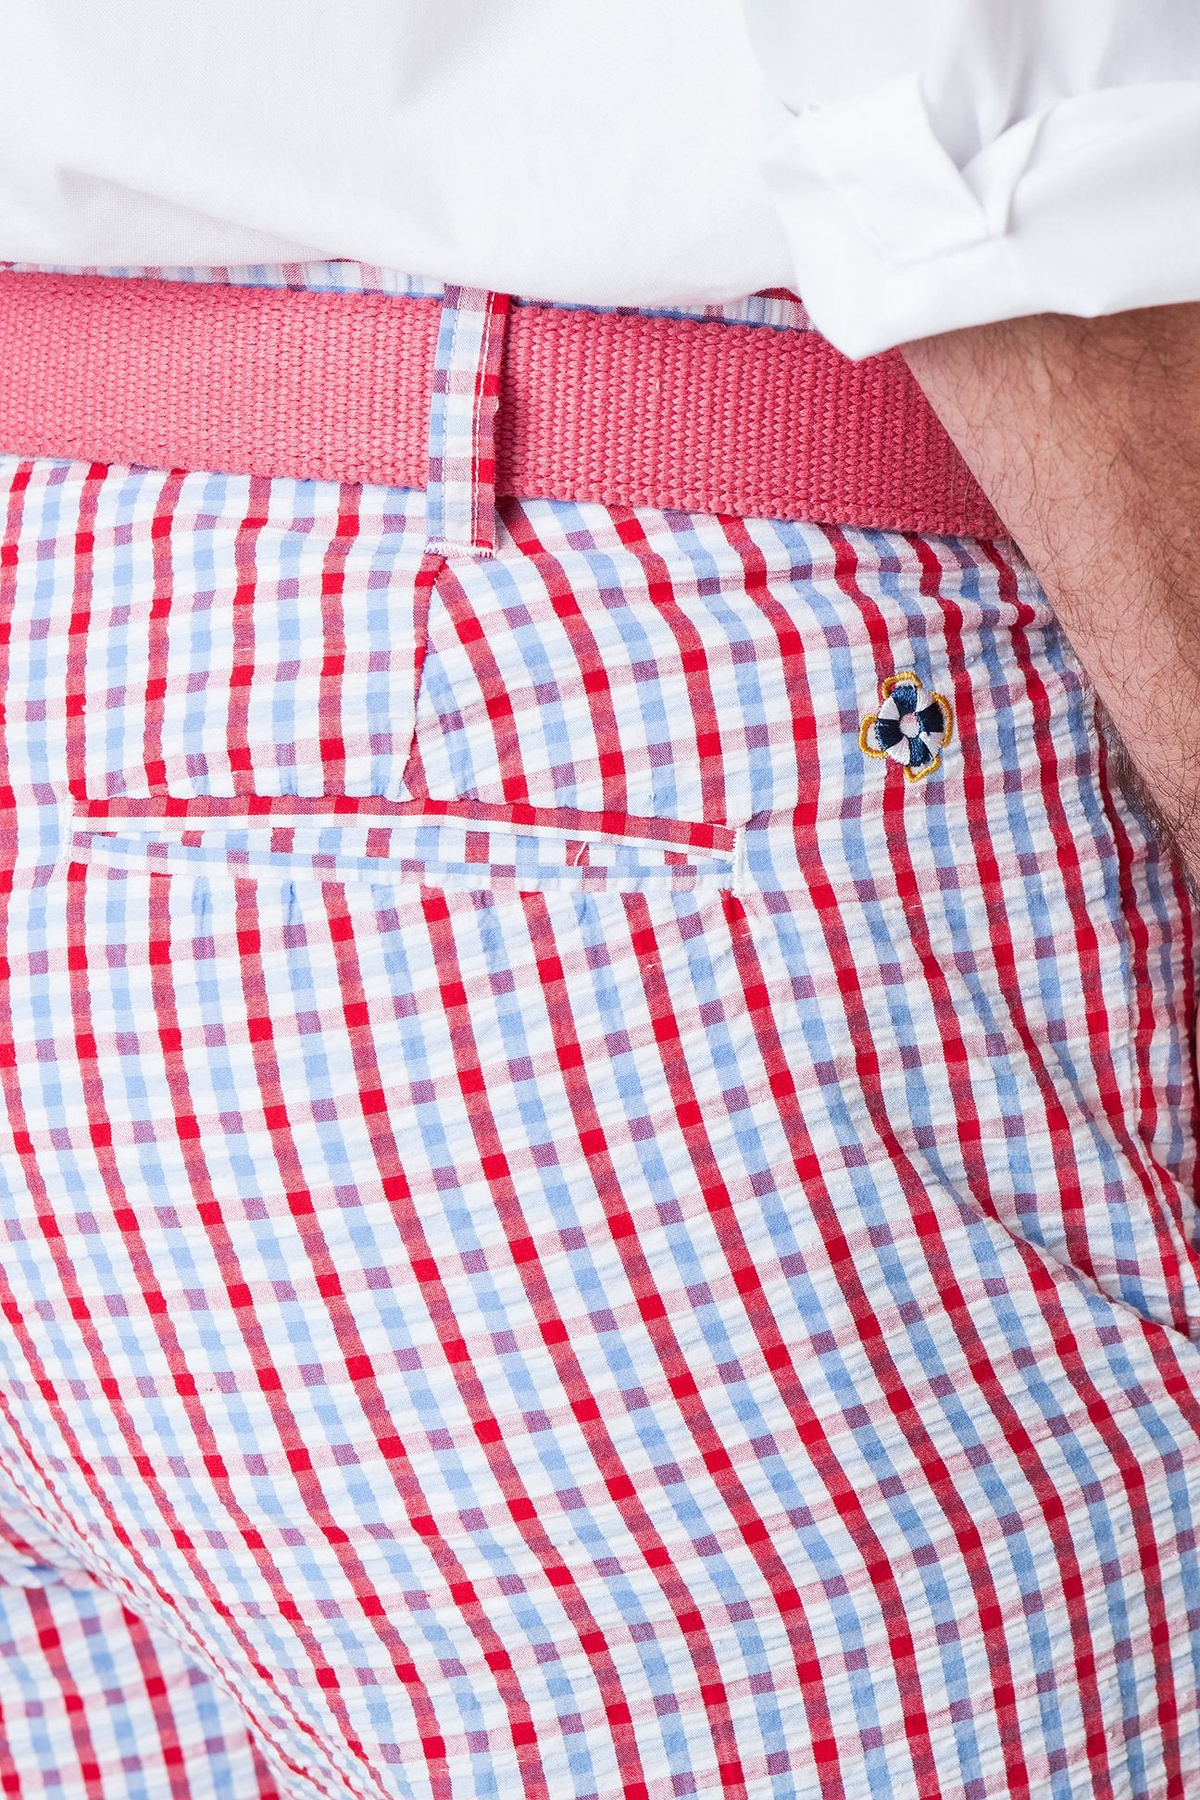 Cisco Short in Red, White, and Blue Seersucker by Castaway Clothing - Country Club Prep